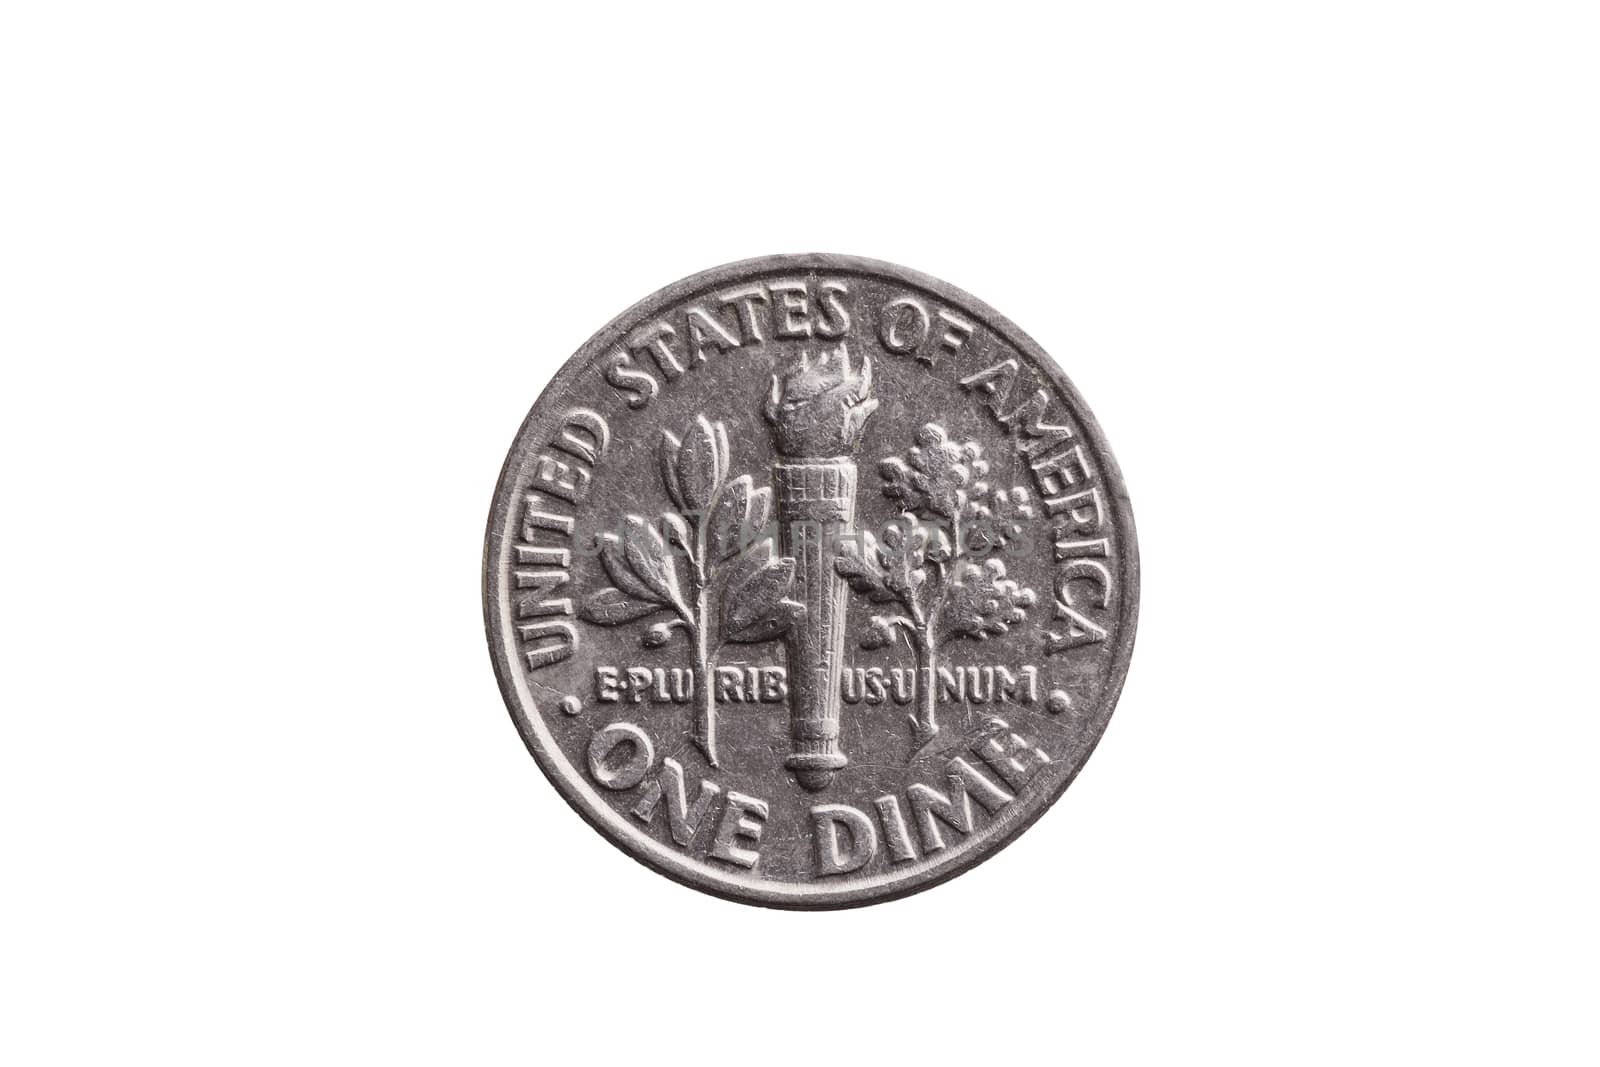 USA dime nickel coin (10 cents) reverse olive branch, torch and oak branch cut out and isolated on a white background